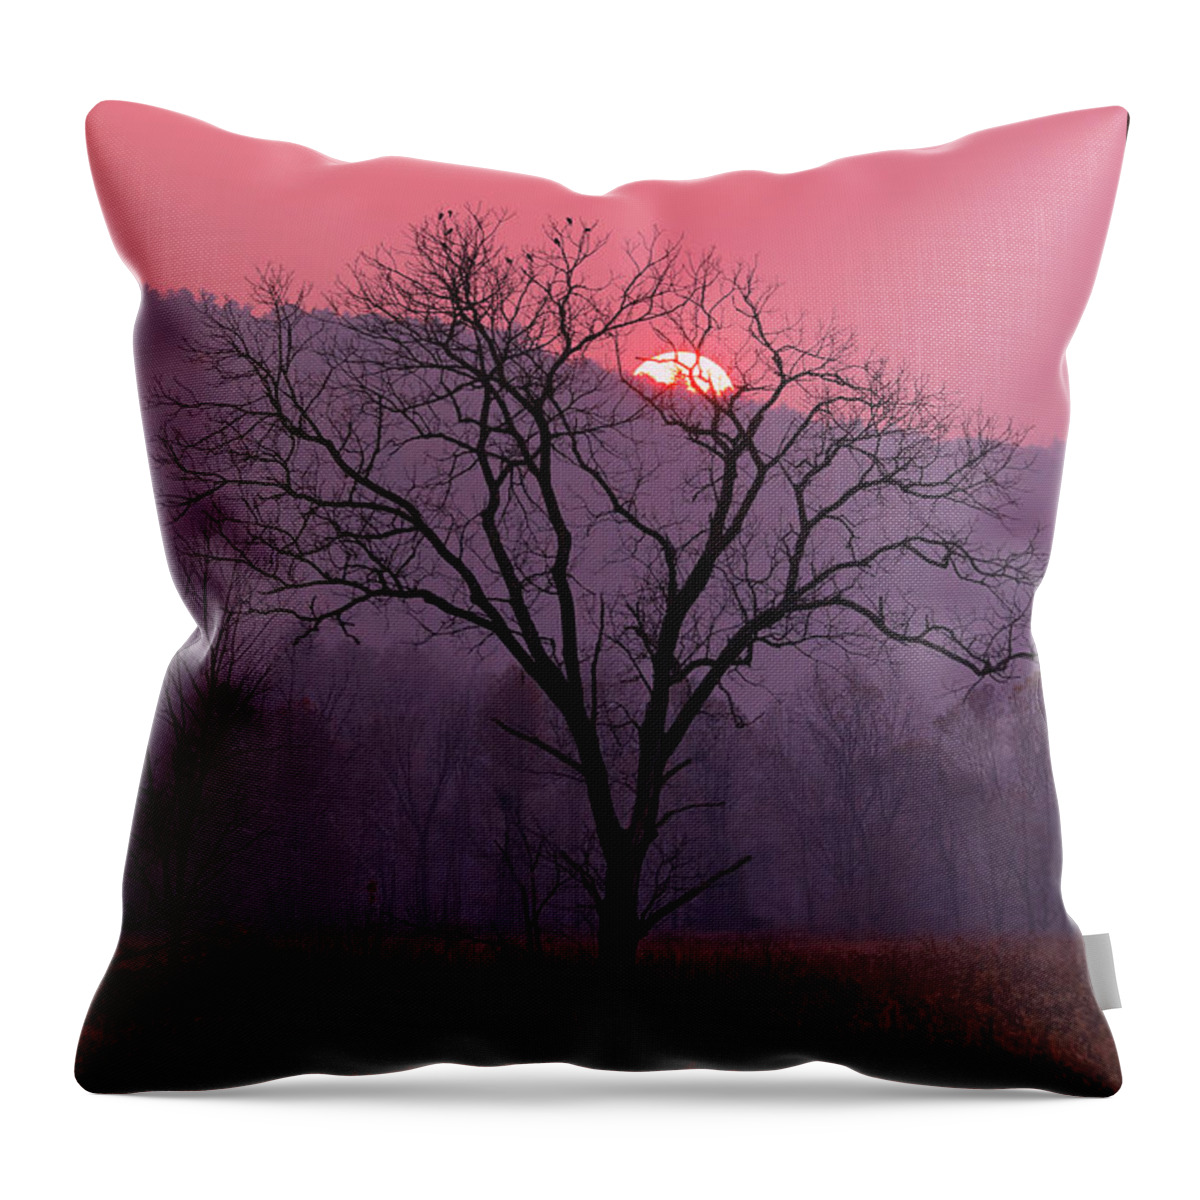 Sunset Throw Pillow featuring the photograph A Tennessee Sunset by Duane Cross